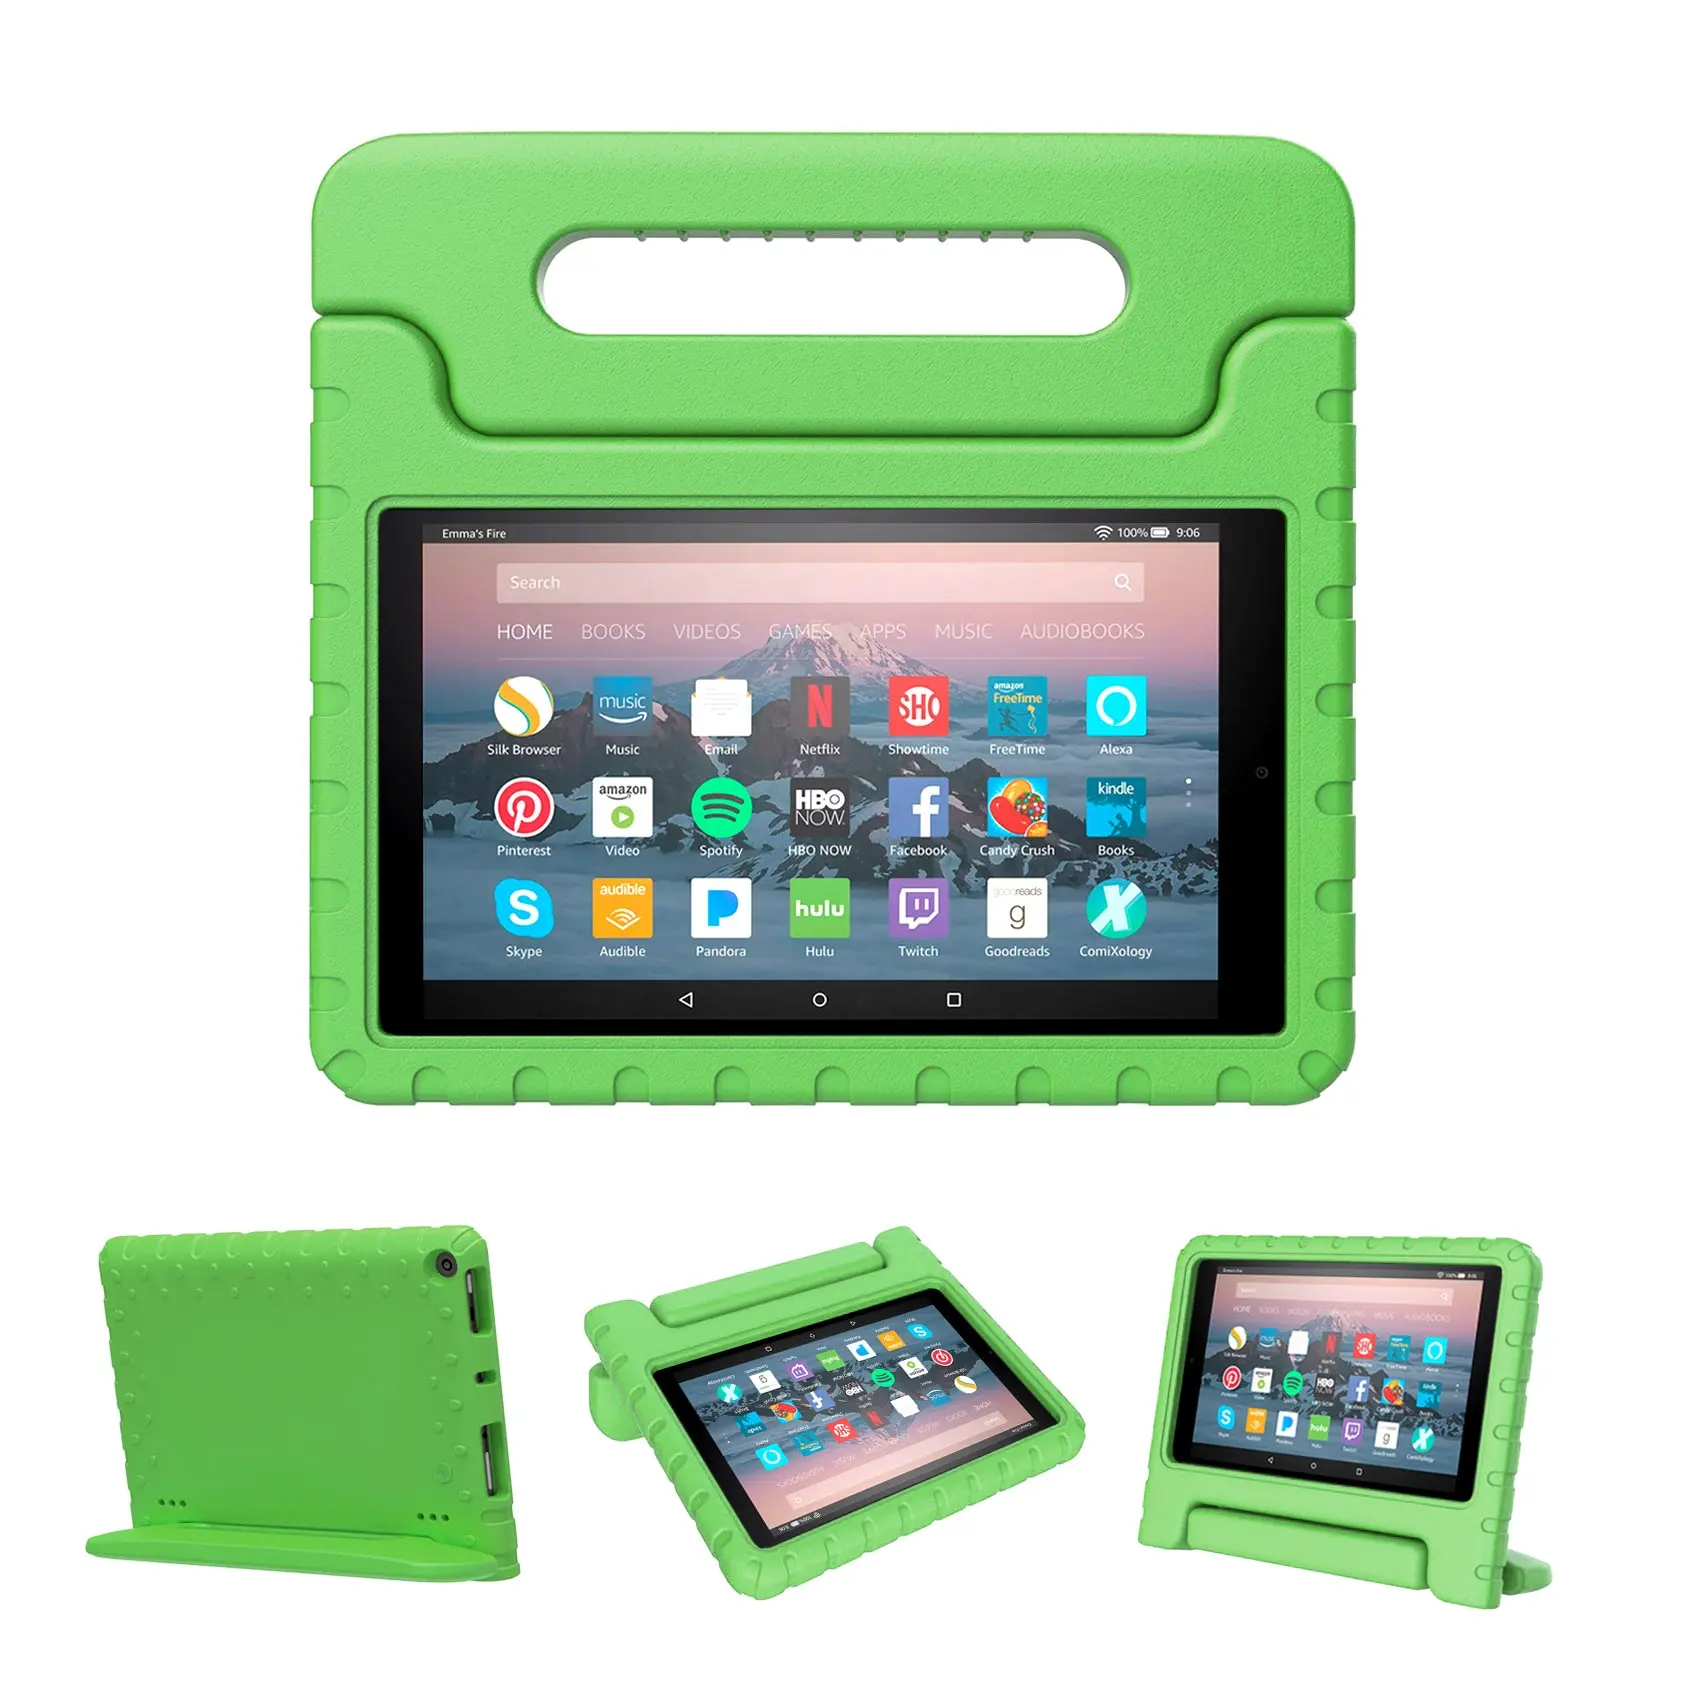 EVA shockproof for amazon kindle fire Case for all-new fire hd 8 2017 / fire hd 8 2016